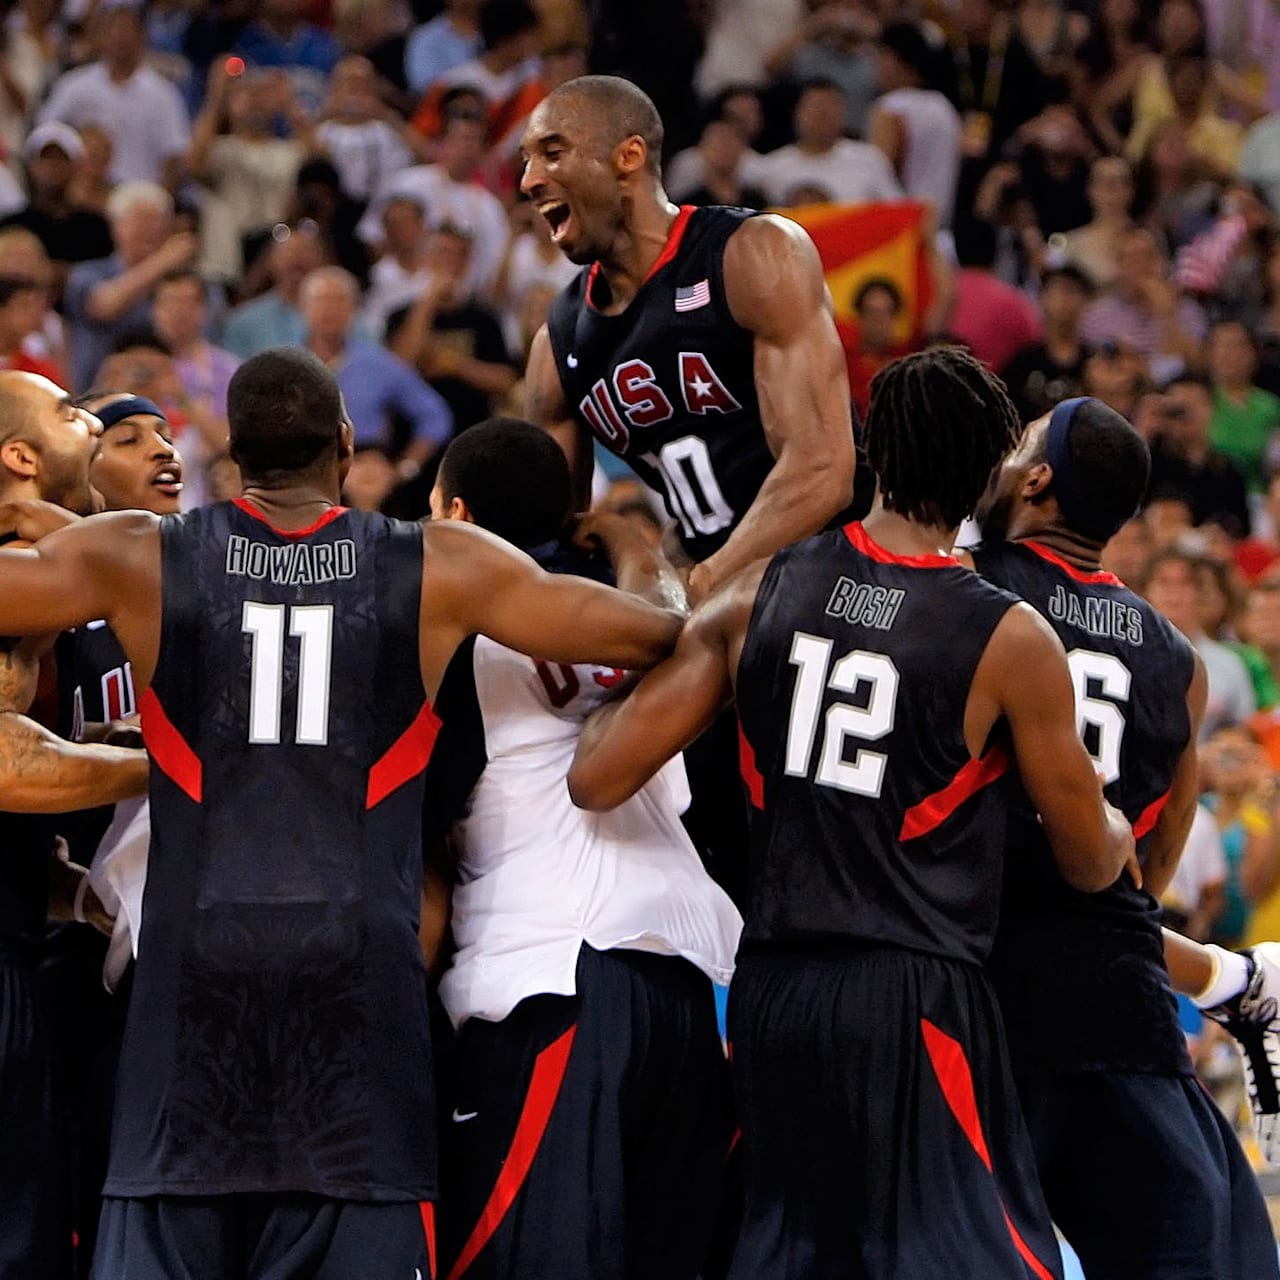 What the Olympics meant to Kobe Bryant